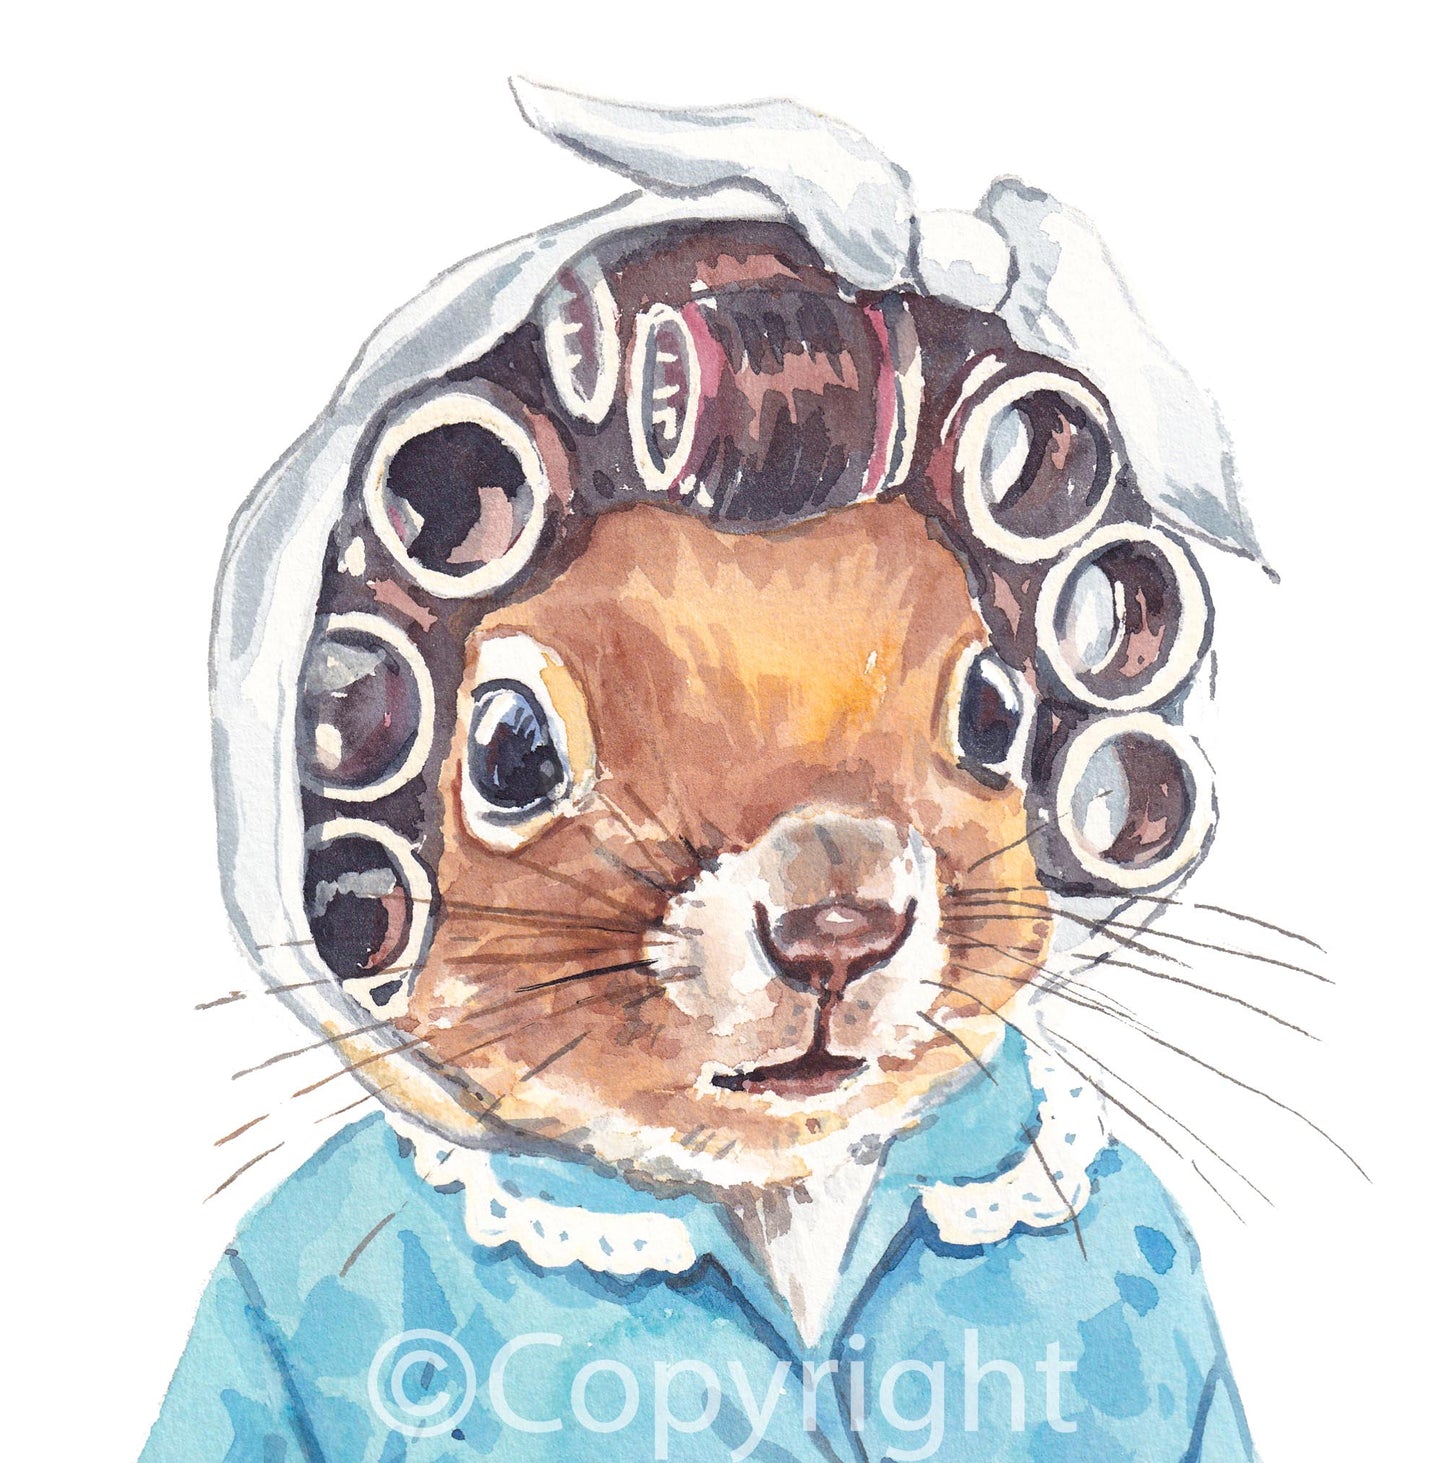 Watercolour painting of a squirrel wearing vintage hair curlers and a quilted housecoat. Art by Deidre Wicks